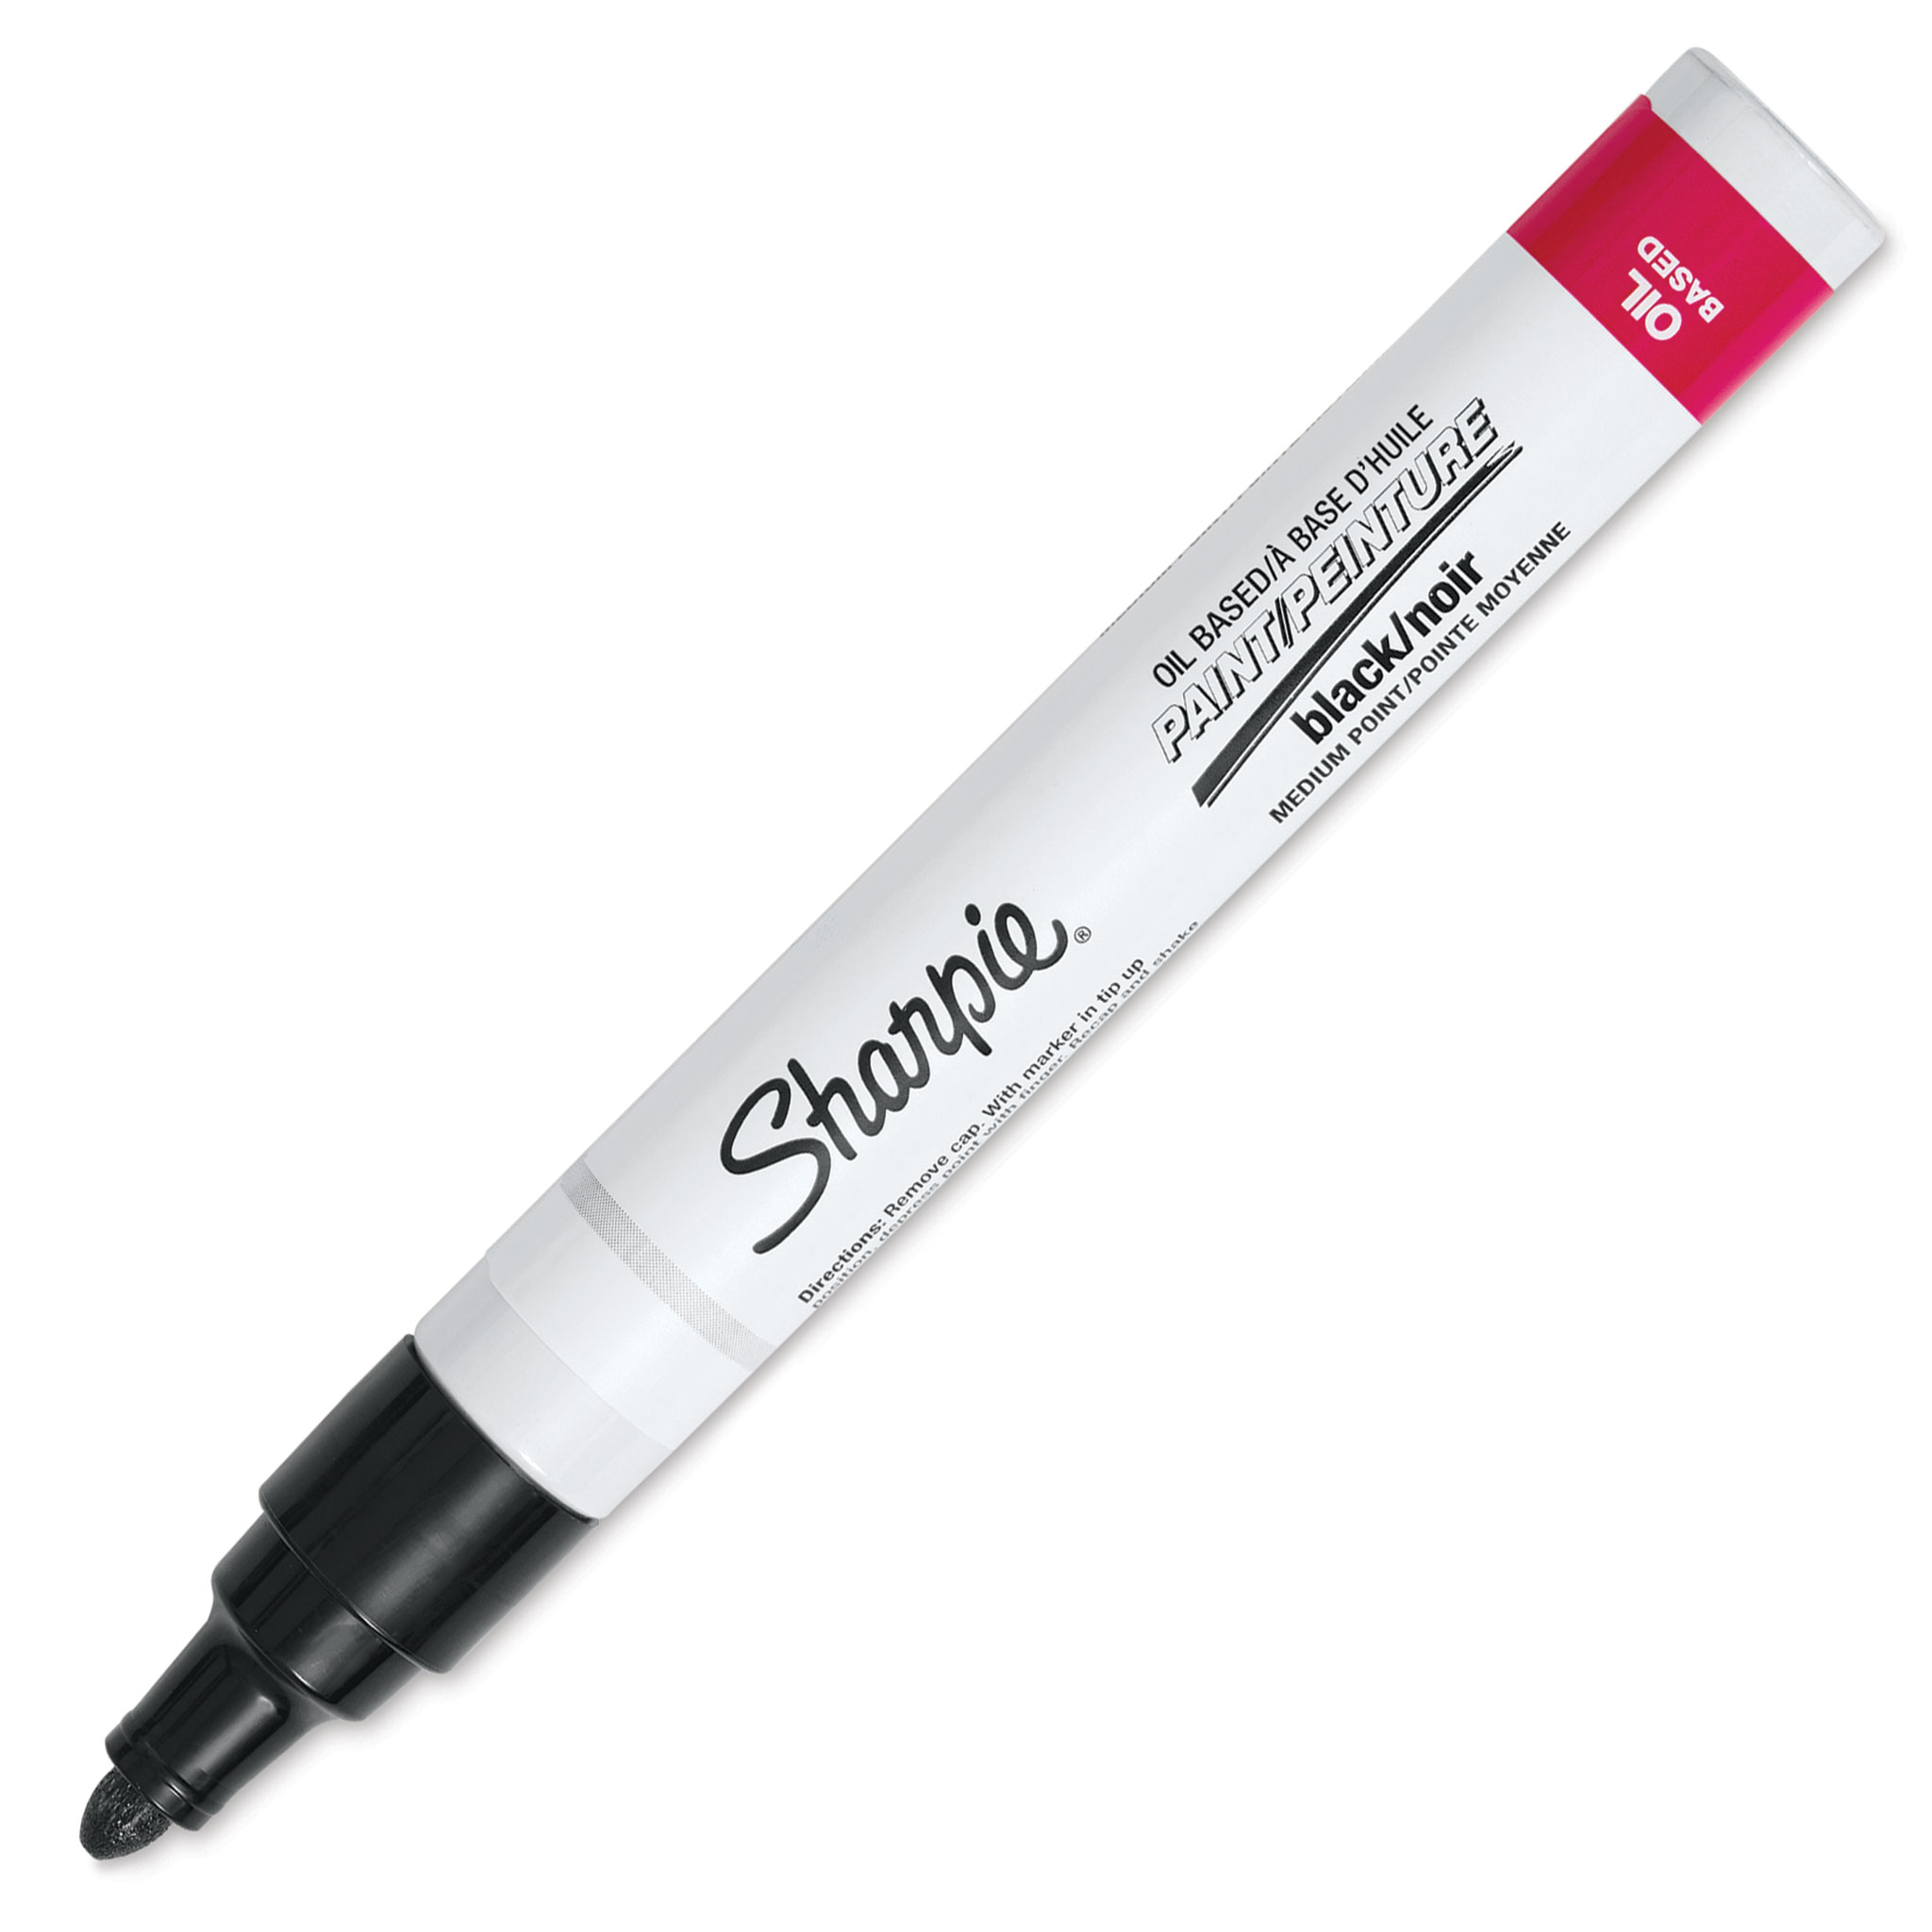 Sharpie Oil-Based Paint Marker, Fine Point, Yellow Ink, Pack of 3